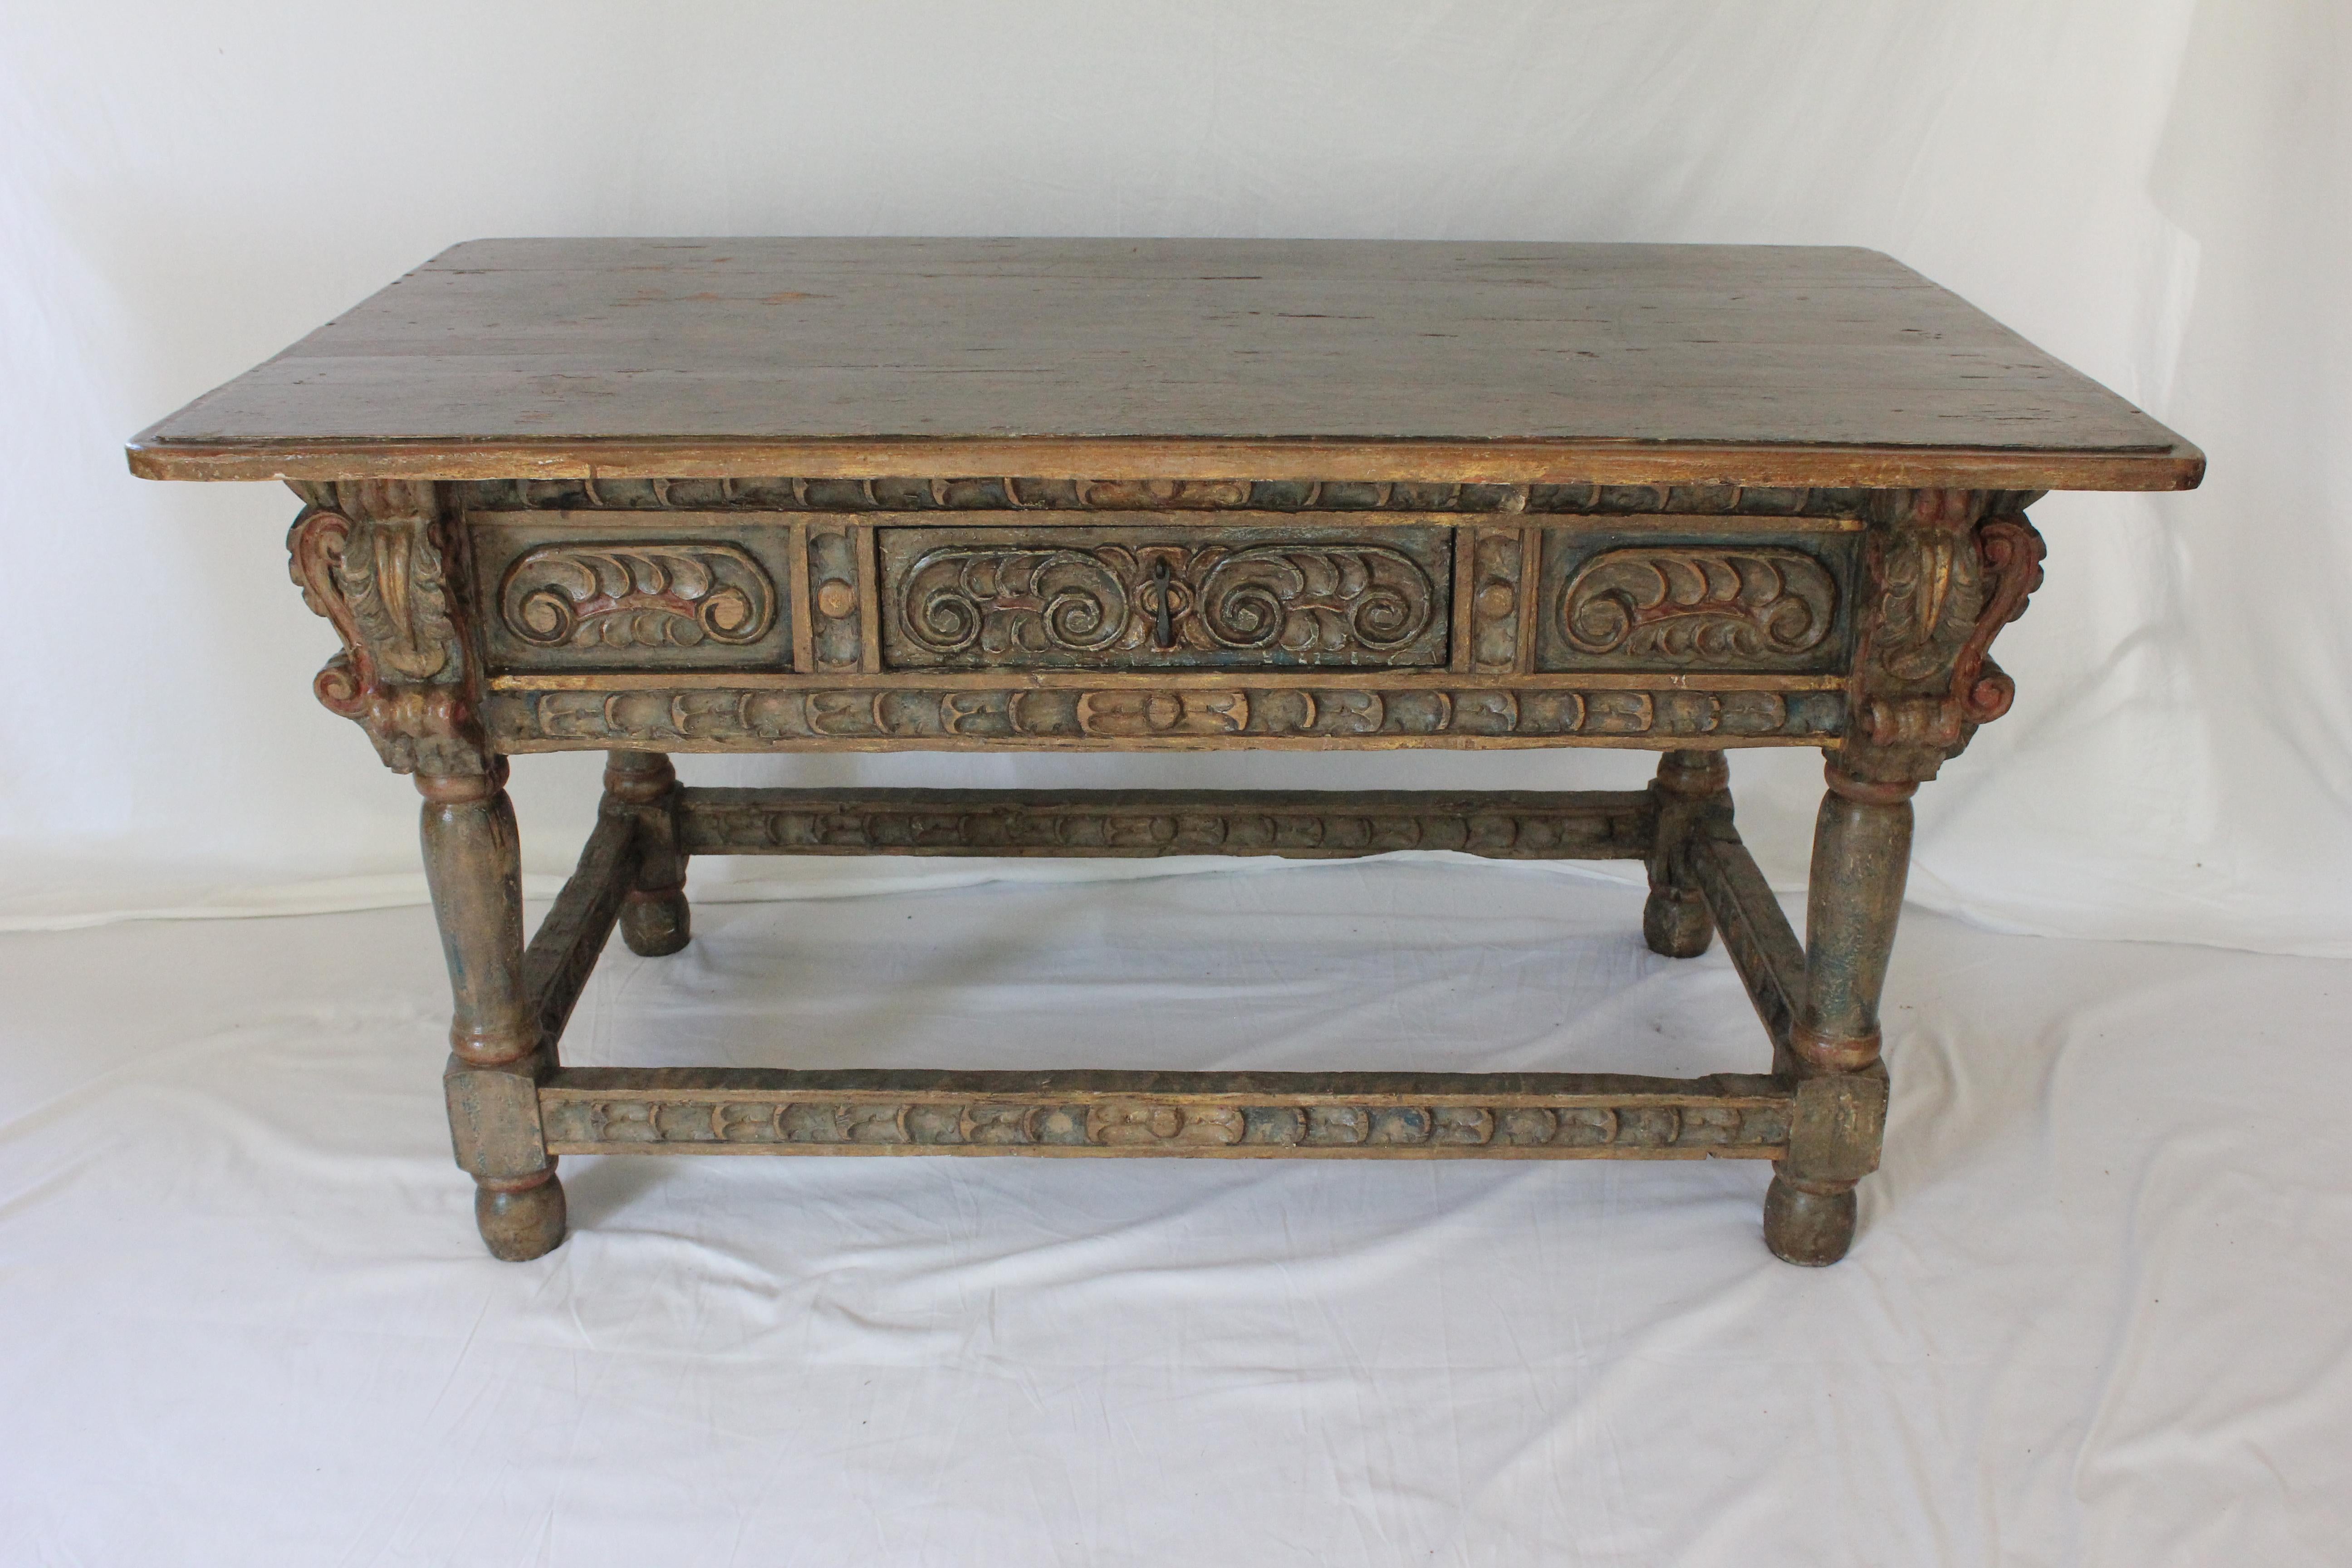 Circa 1750 Spanish Baroque / Spanish Colonial Polychrome Heavily Carved Oak Refectory Table with 3 drawers (center drawer w/ lock) w/ highly carved drawer fronts, apron and bottom stretcher bars. Retains original polychrome finish.